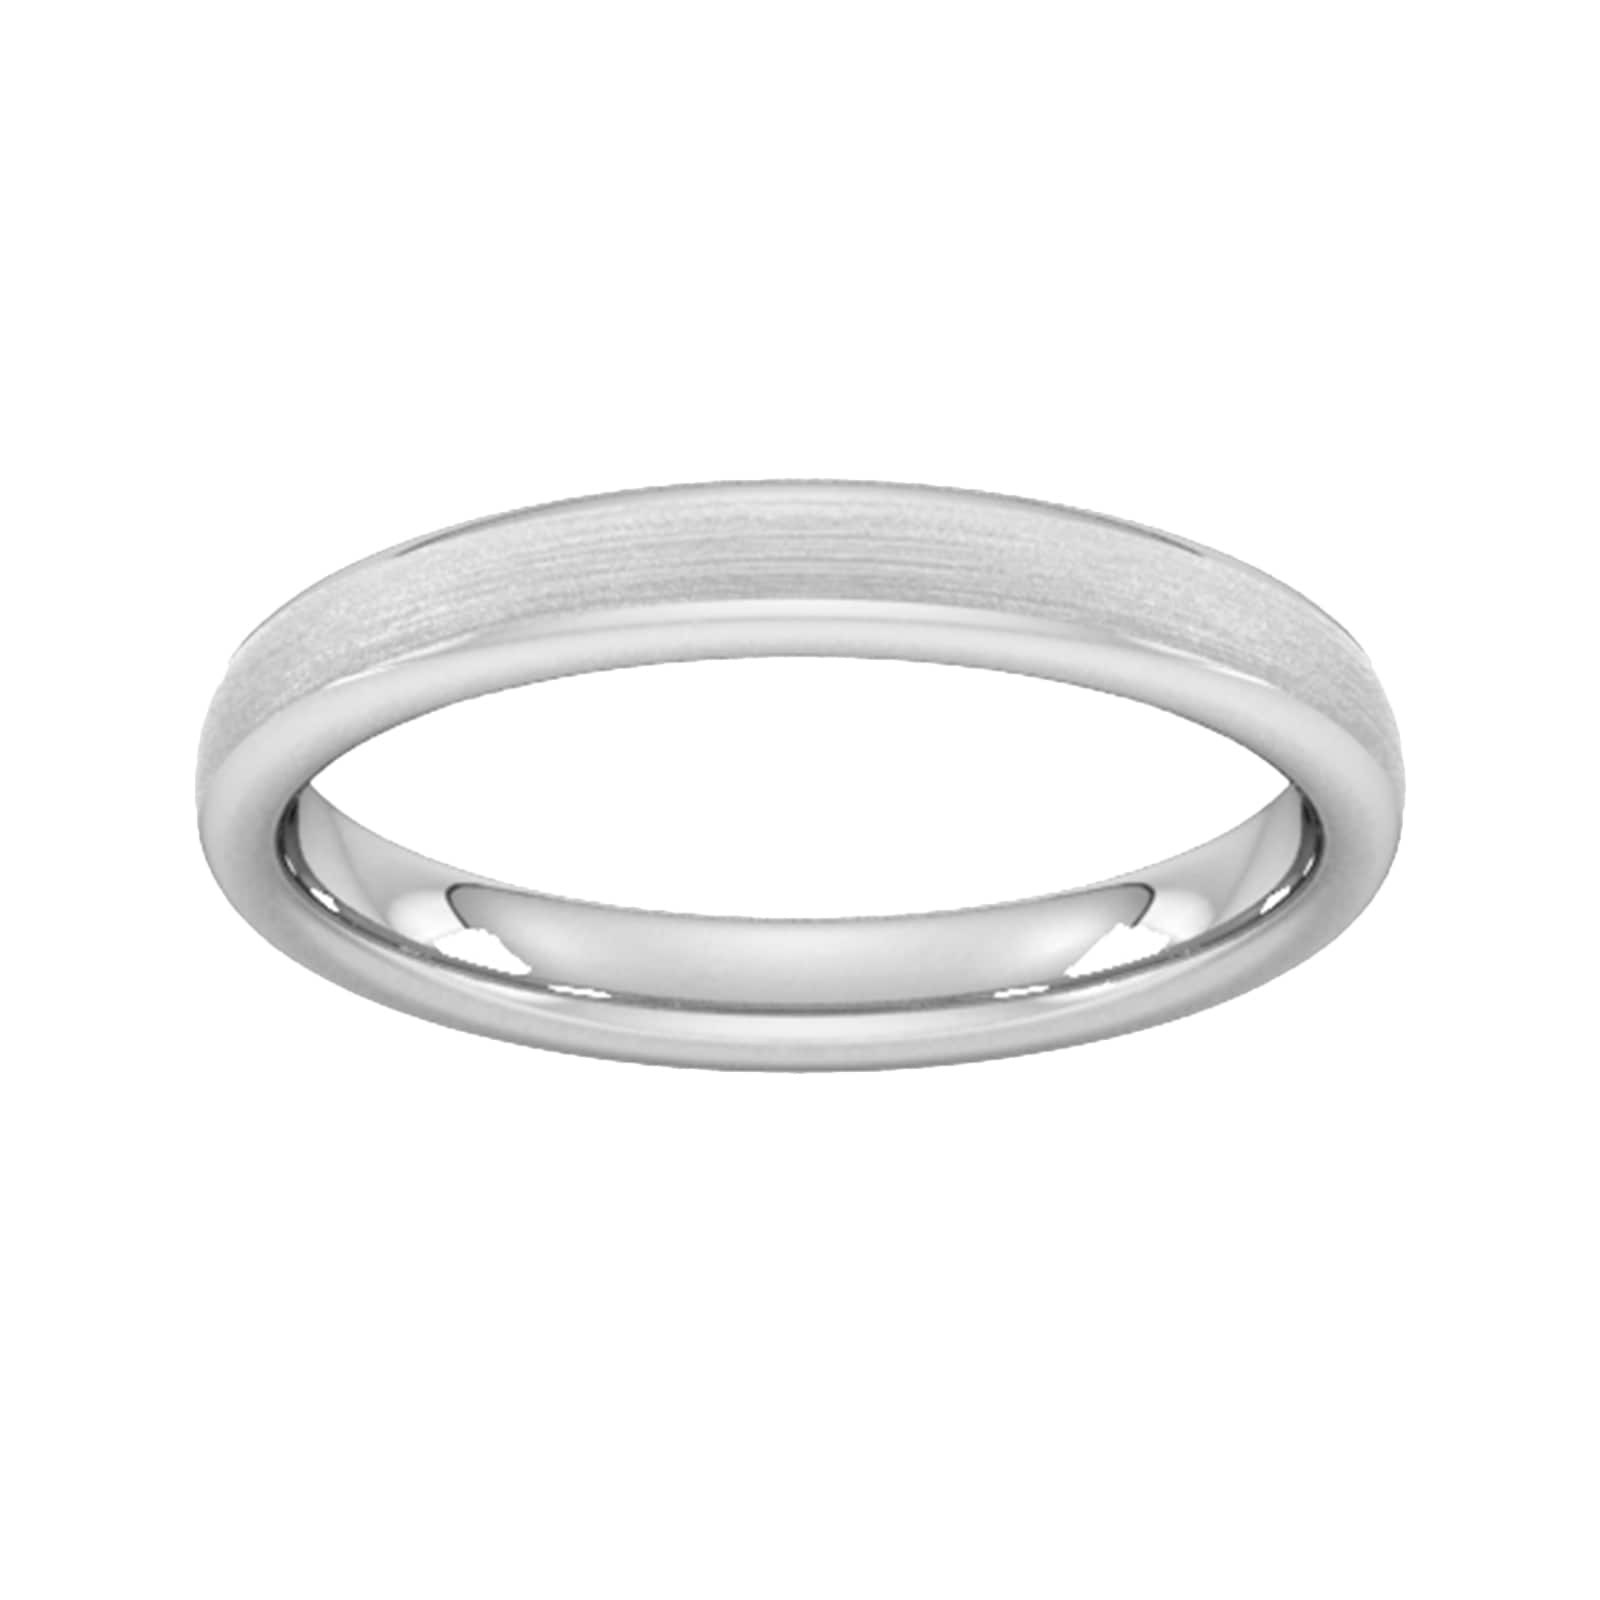 3mm Traditional Court Standard Matt Finished Wedding Ring In 18 Carat White Gold - Ring Size P